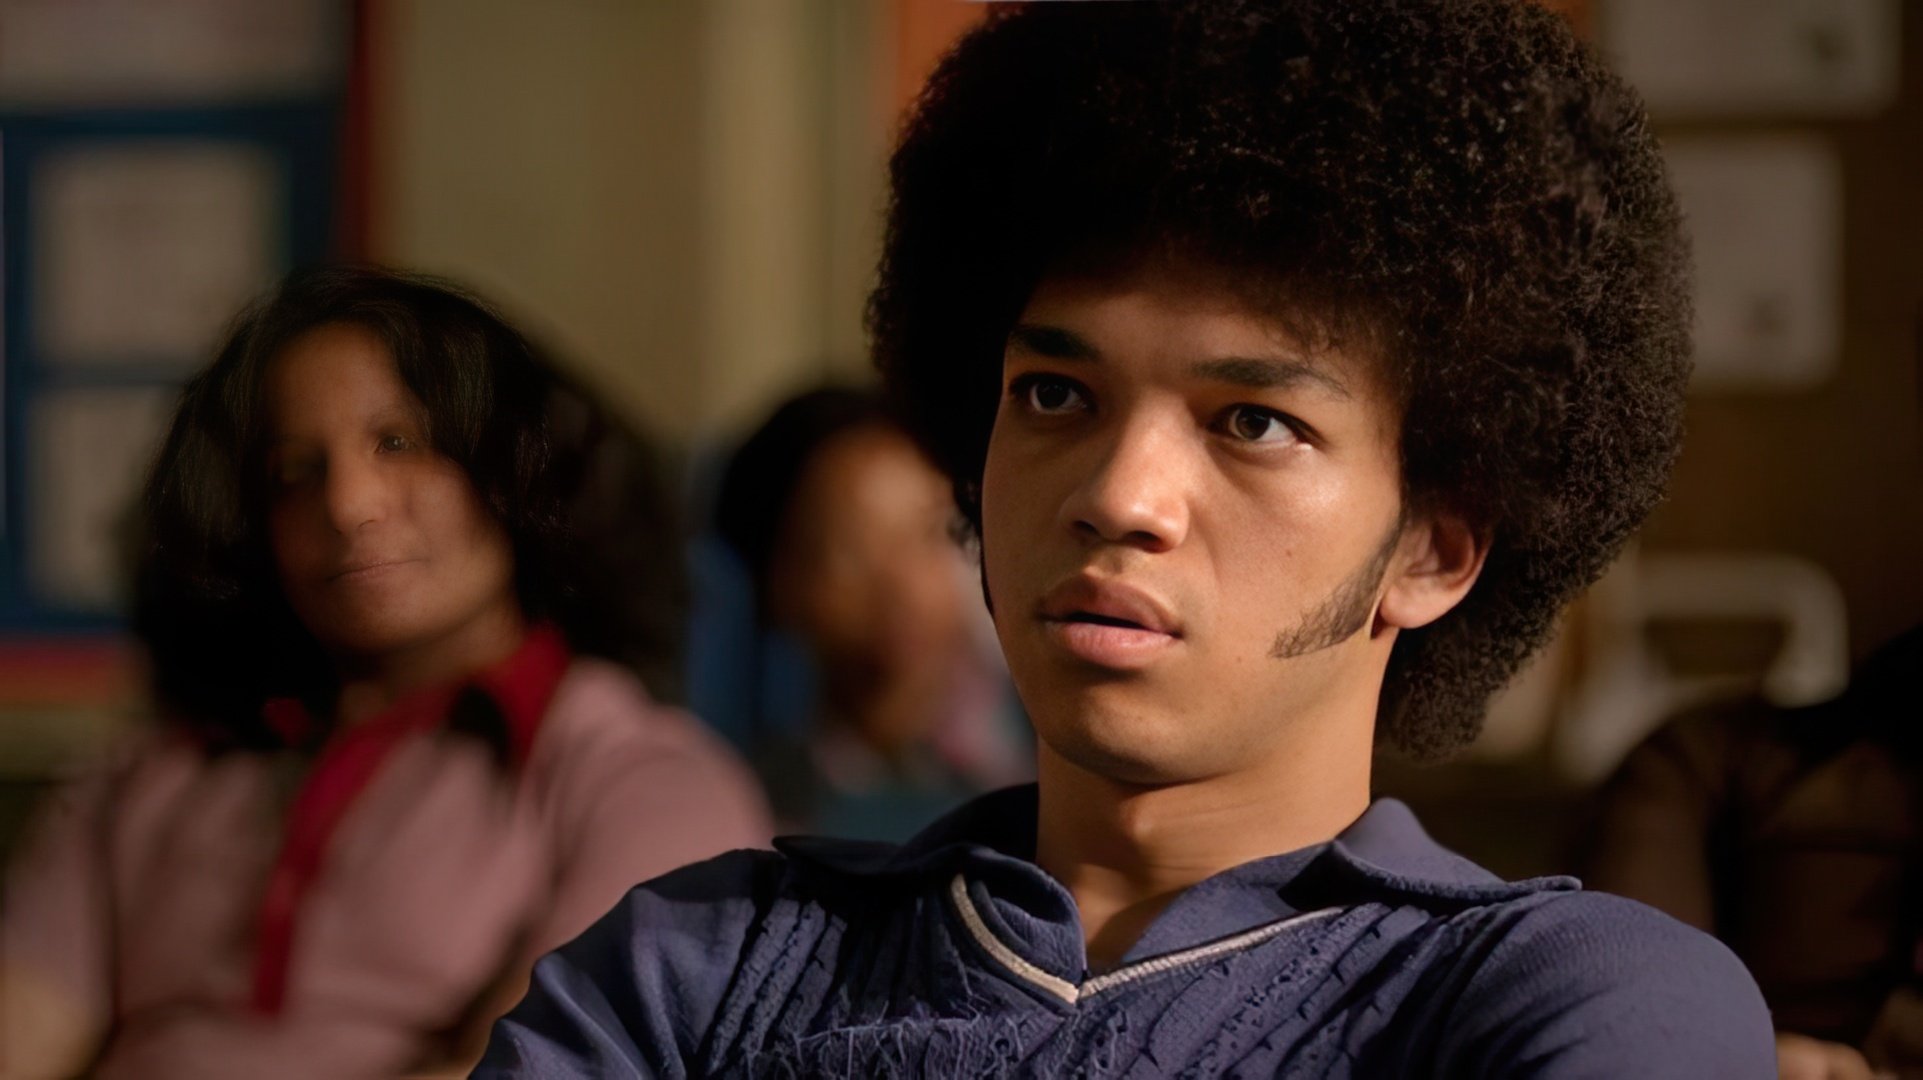 Justice Smith made his television debut in 2012